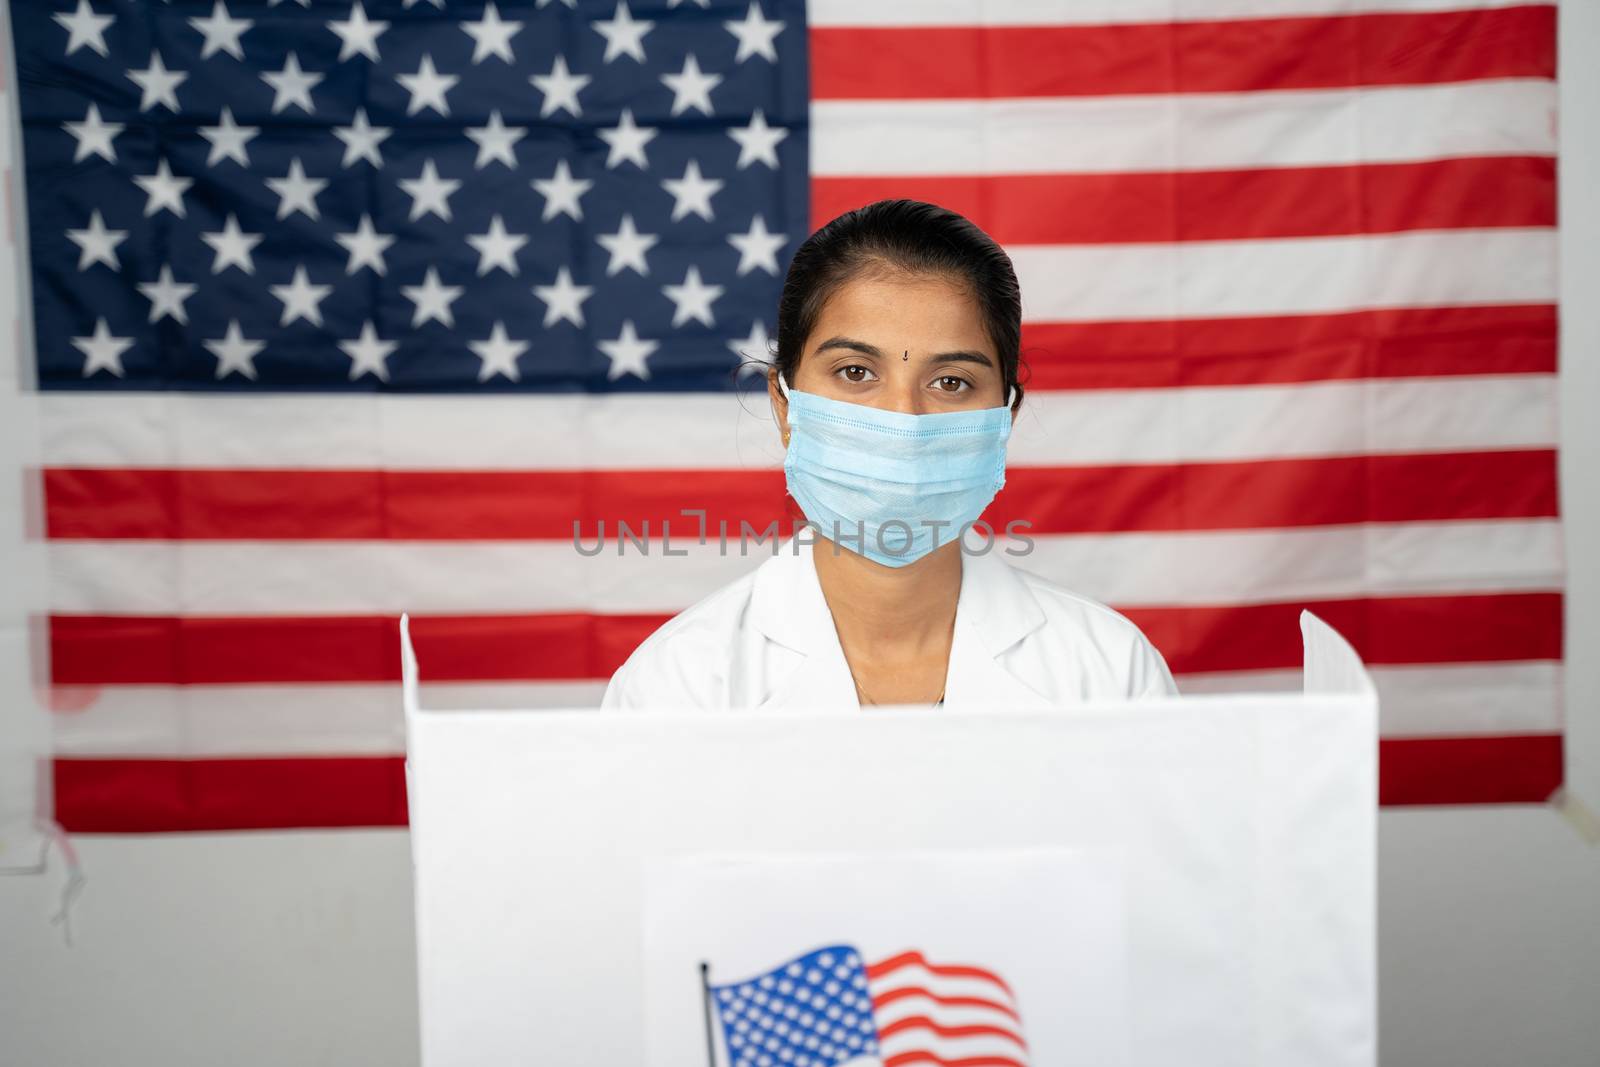 Doctor or nurse coming to polling booth with medical mask wearing for voting - concept of US election, in person voting showing with US flag as background